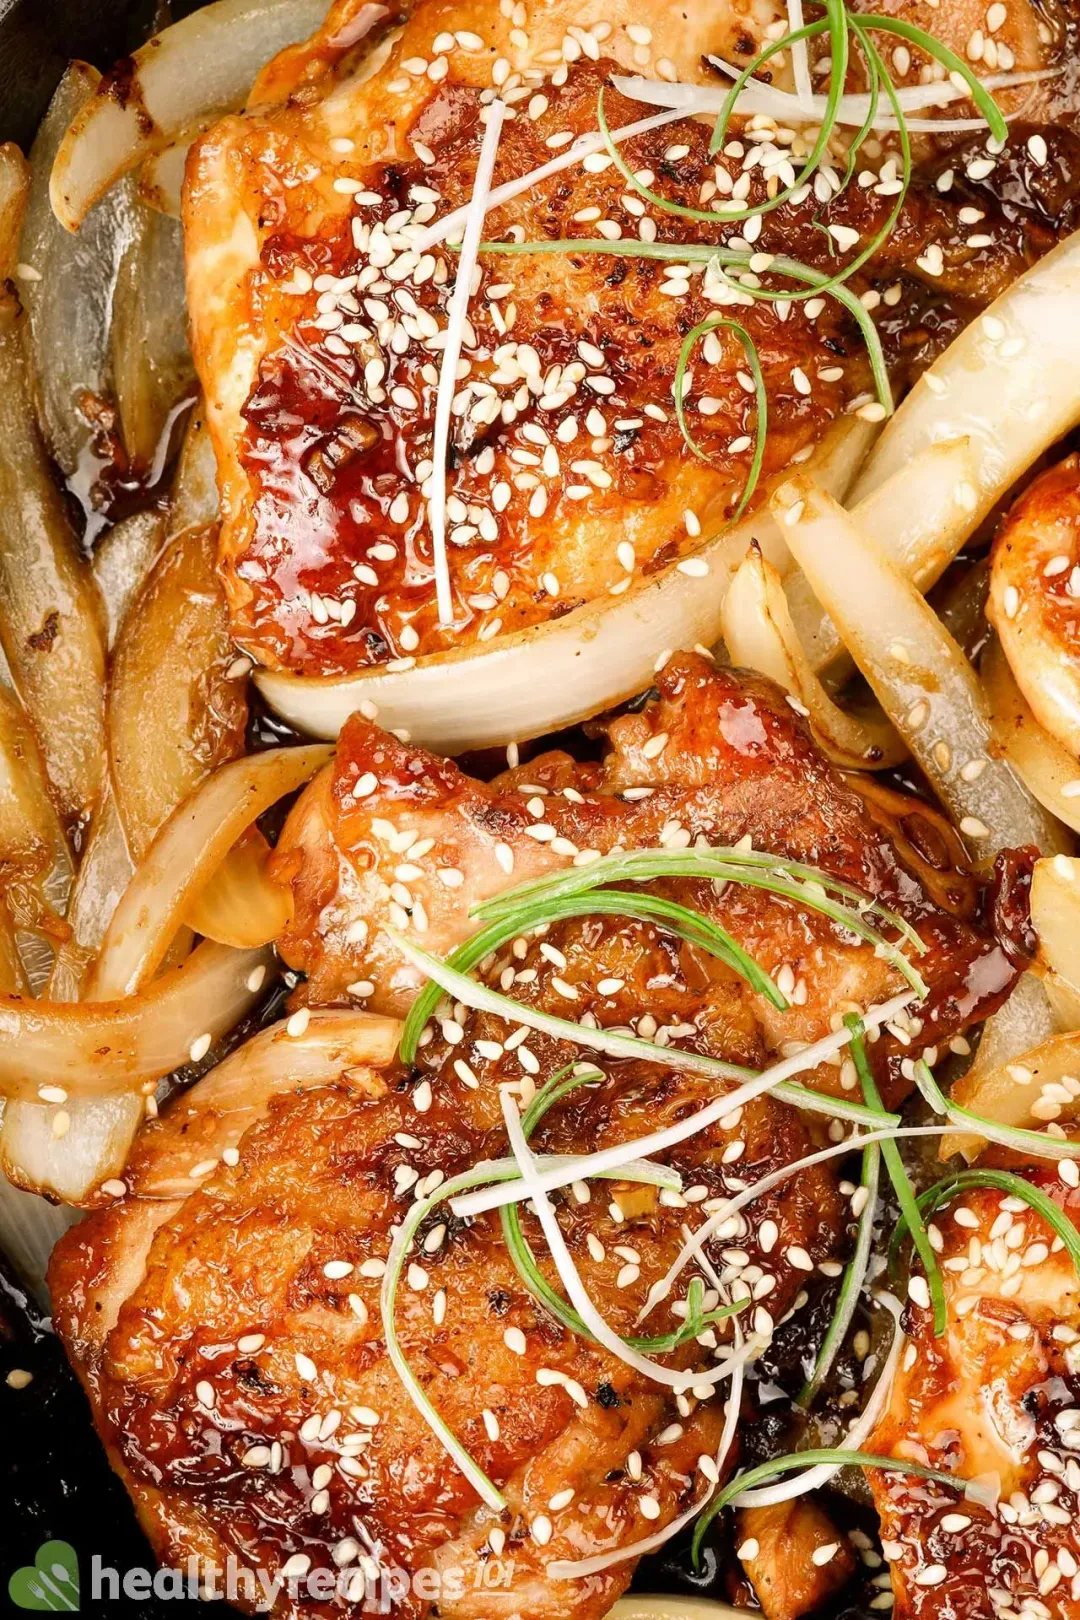 Glossy pieces of teriyaki chicken with sesame seeds, slices of onions, and green onion shaves